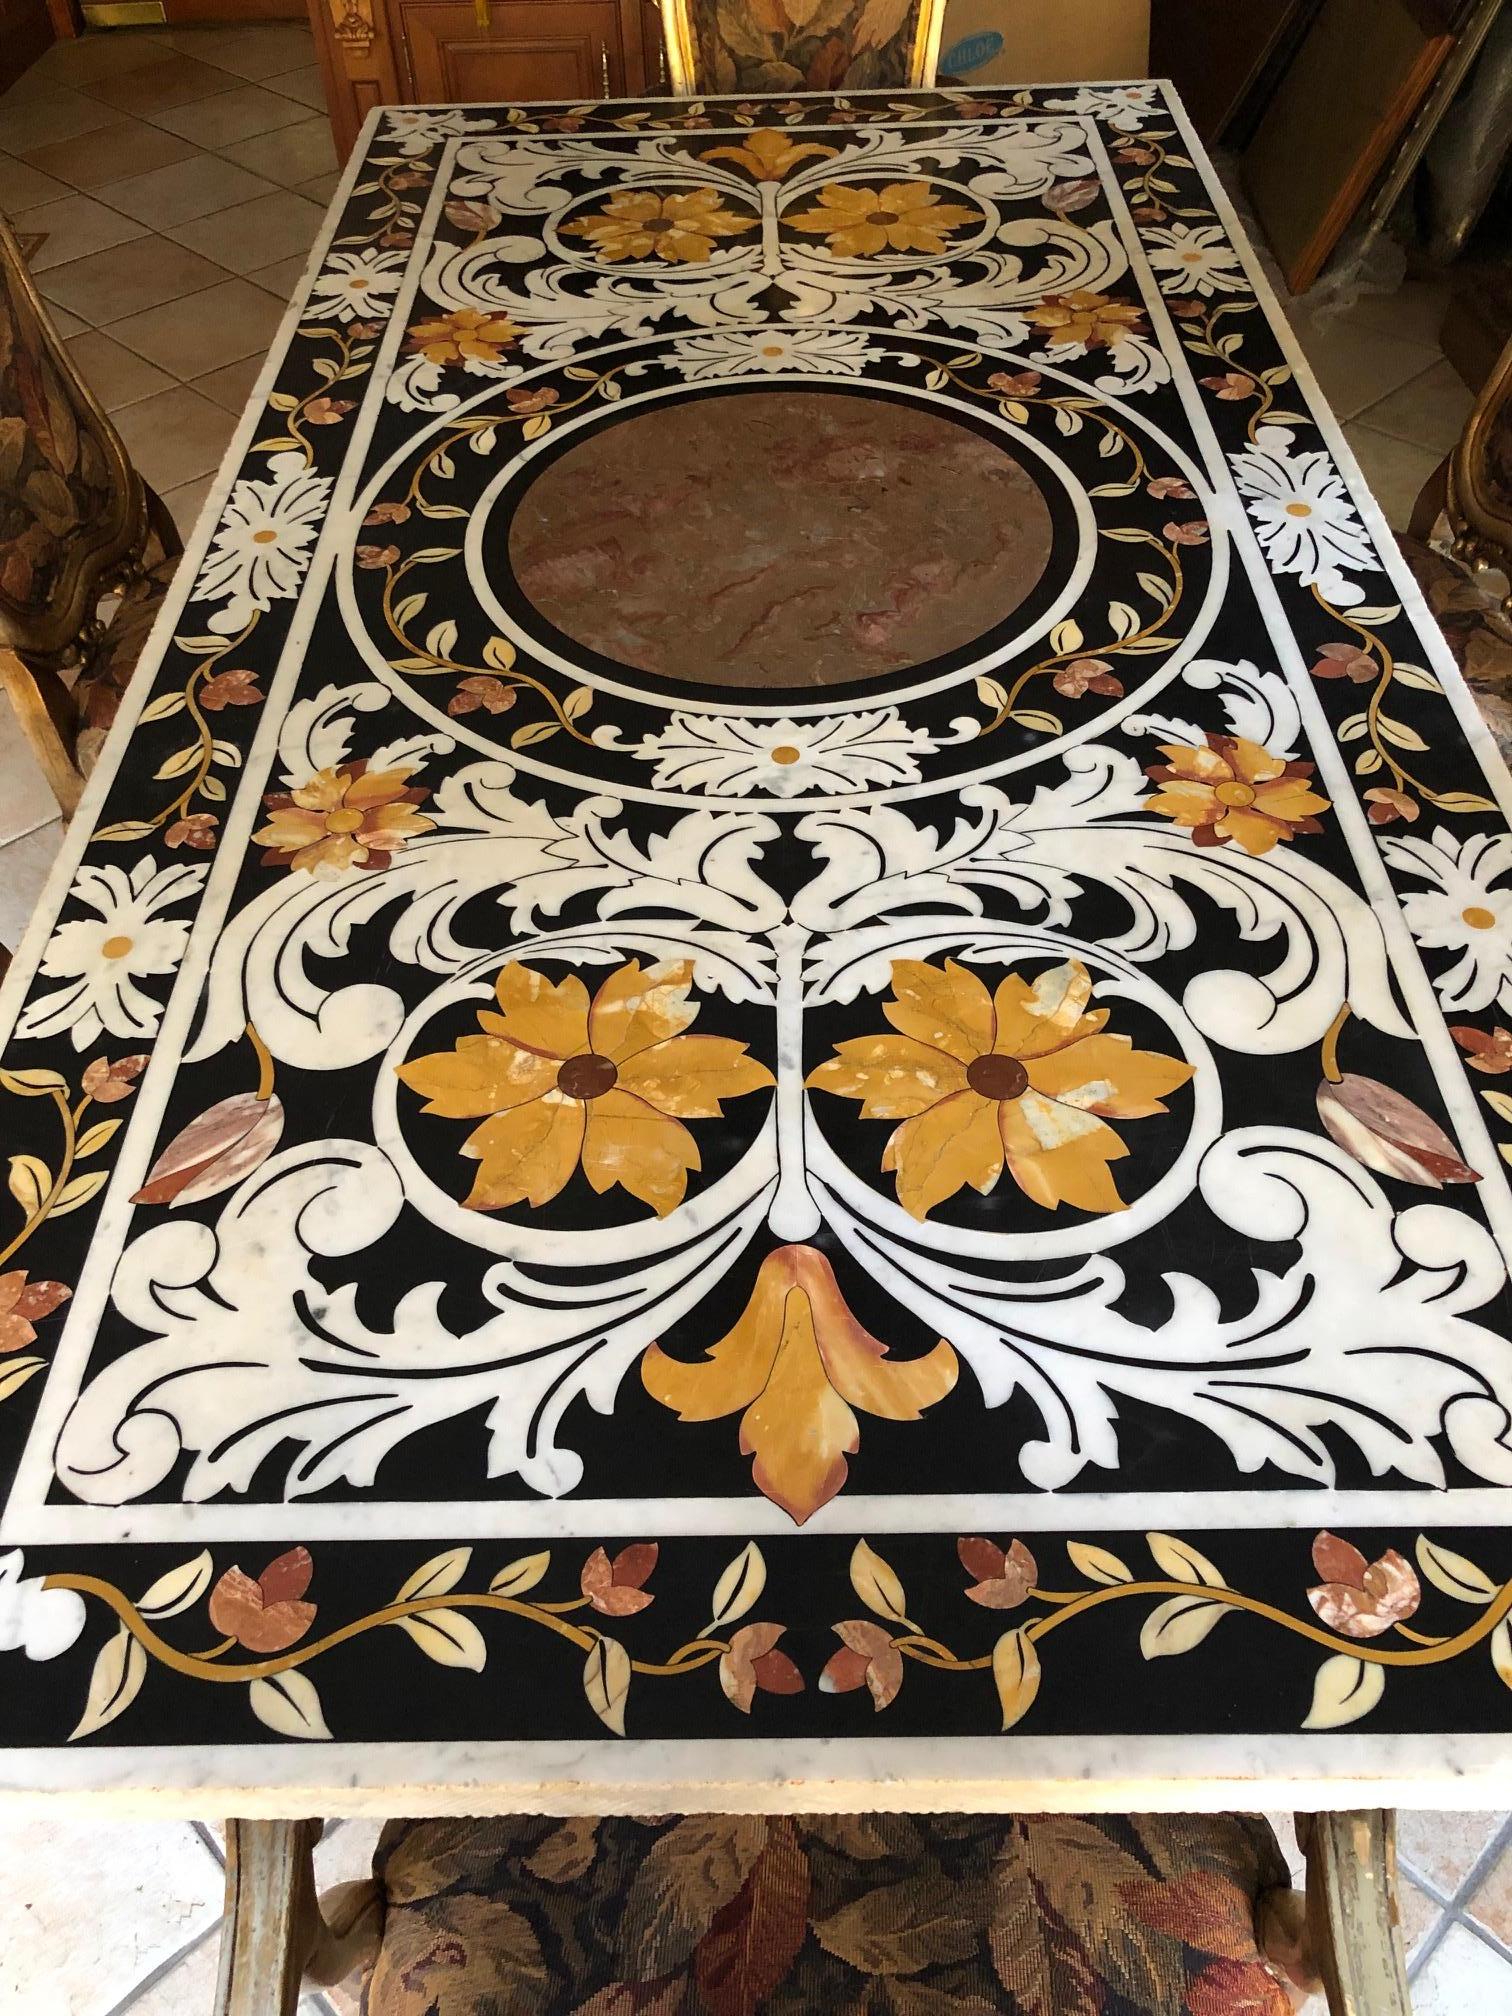 Rare 18th century Italian white marble Pietra Dura and scagliola marquetry stone inlaid top dining table with colorful floral vine decoration on black and white ground, set on carved stone figural bases 79